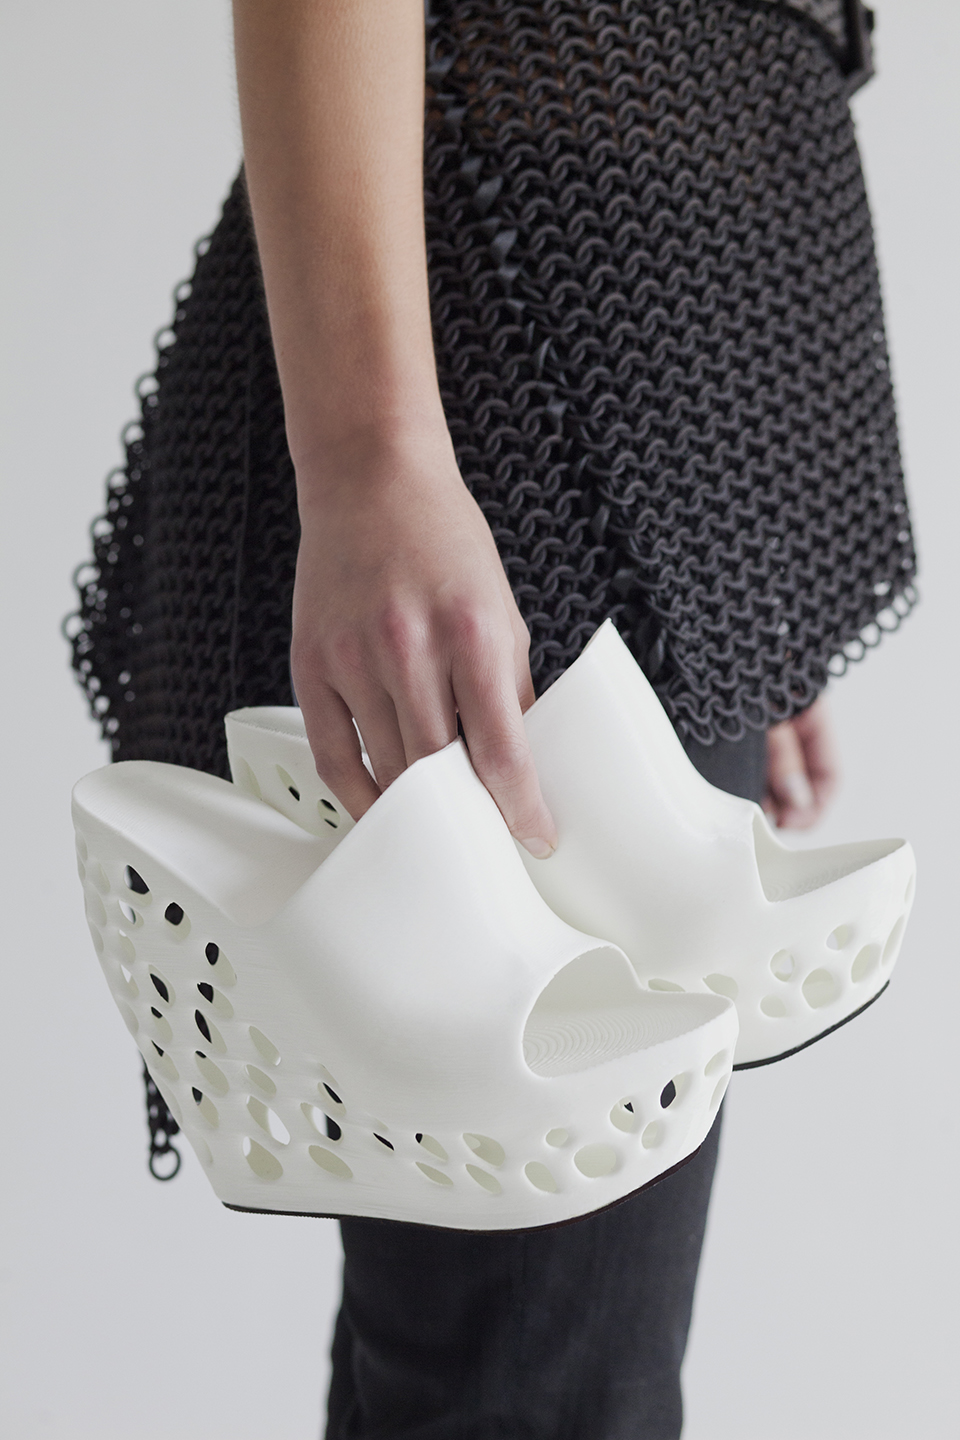 Cubify 3D Printed Shoes by Janne Kyttanen 4